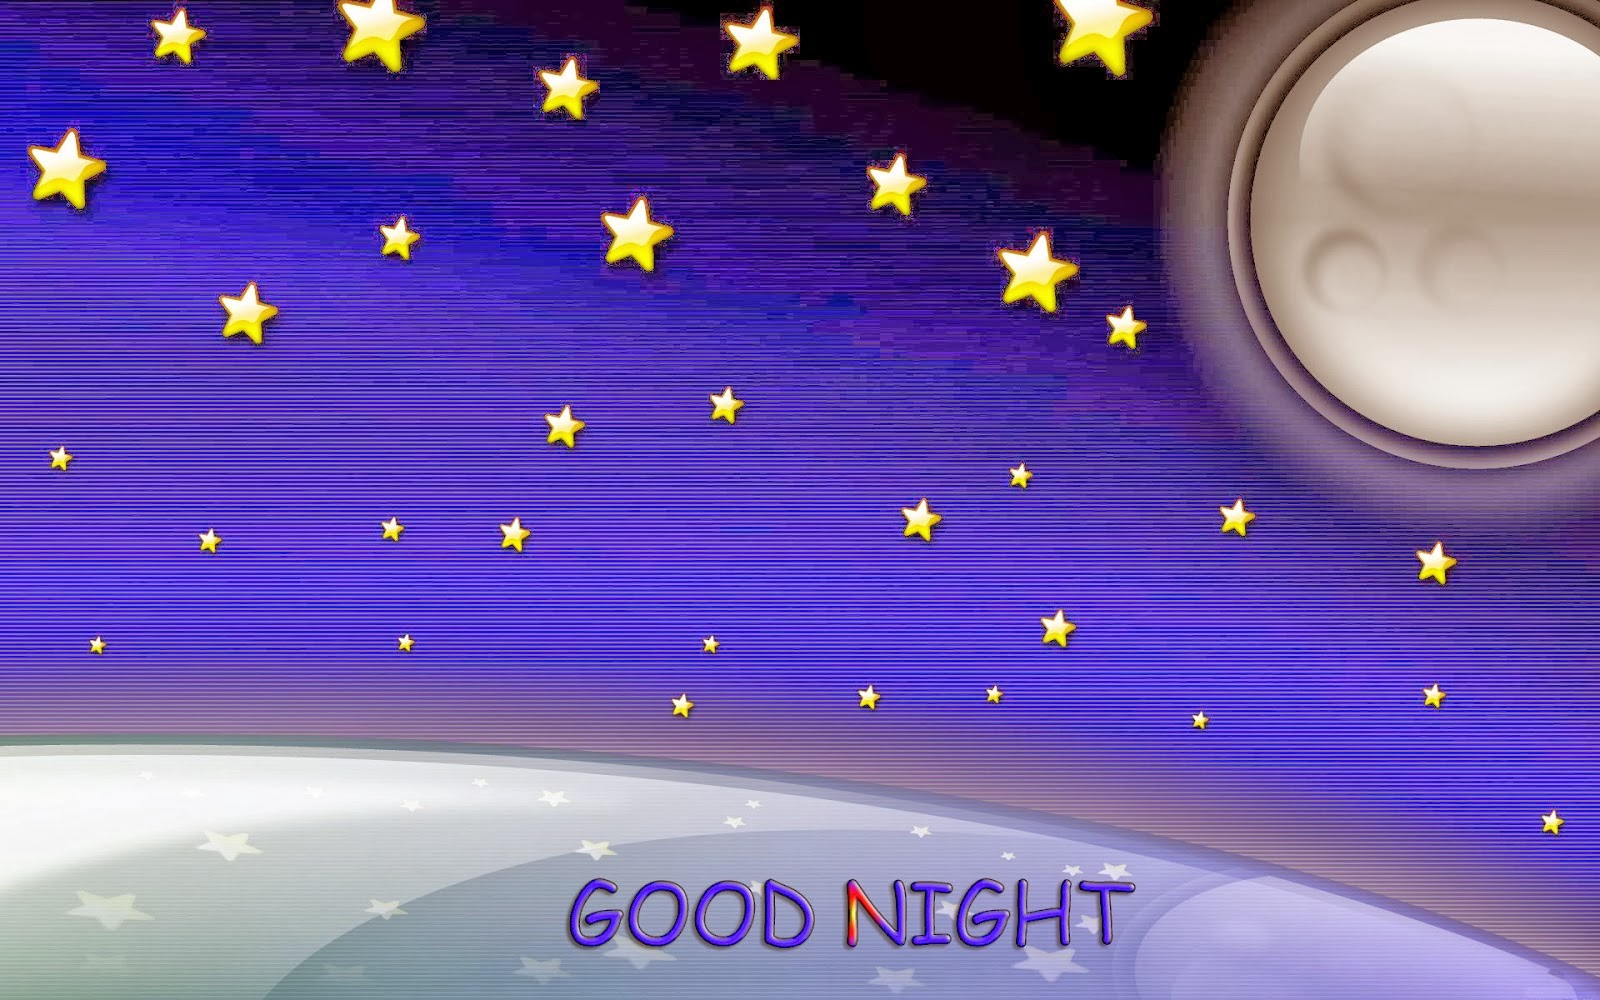 Good Night HD Wallpapers Free Download